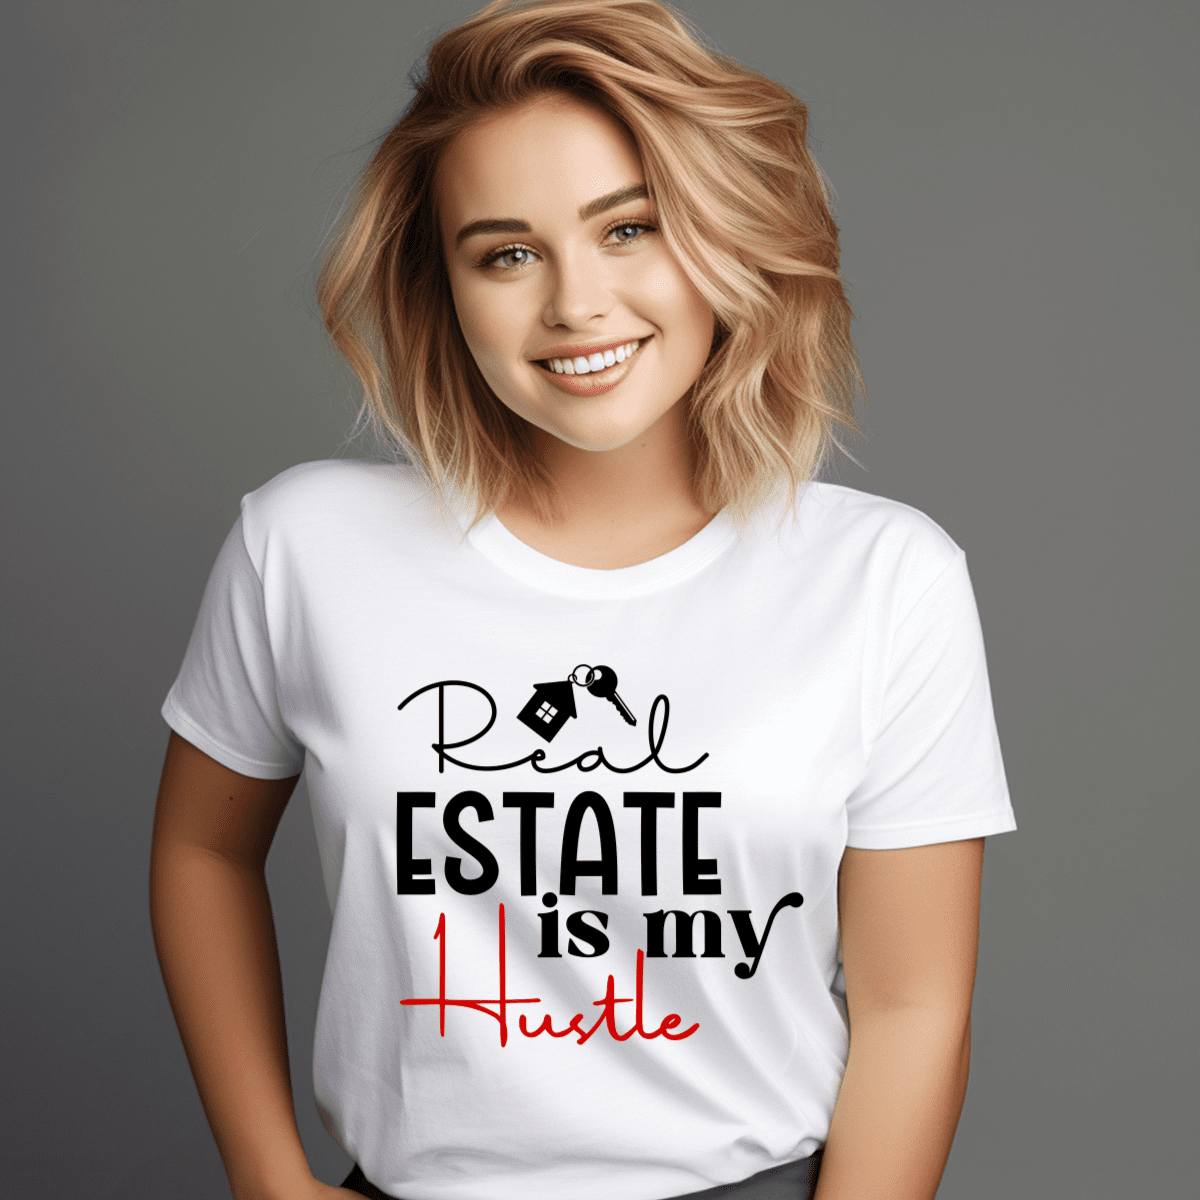 Image shows a t shirt transfer that says Real Estate is my hustle